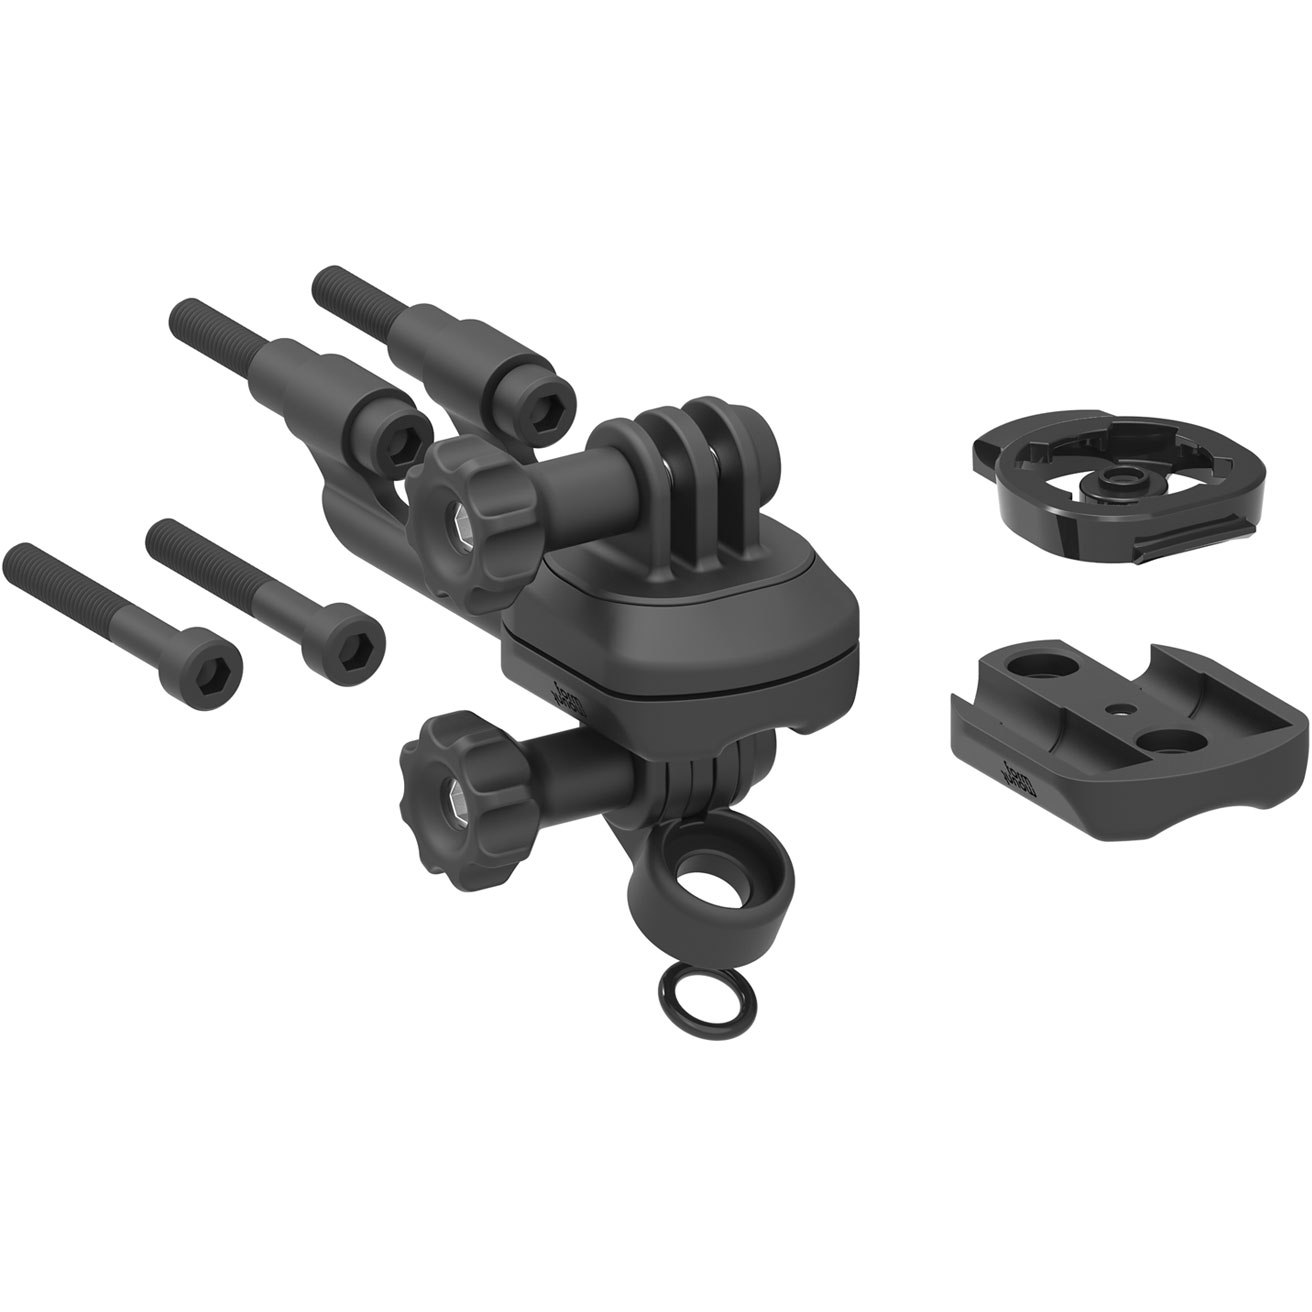 Picture of Lezyne X-Lock Mount System